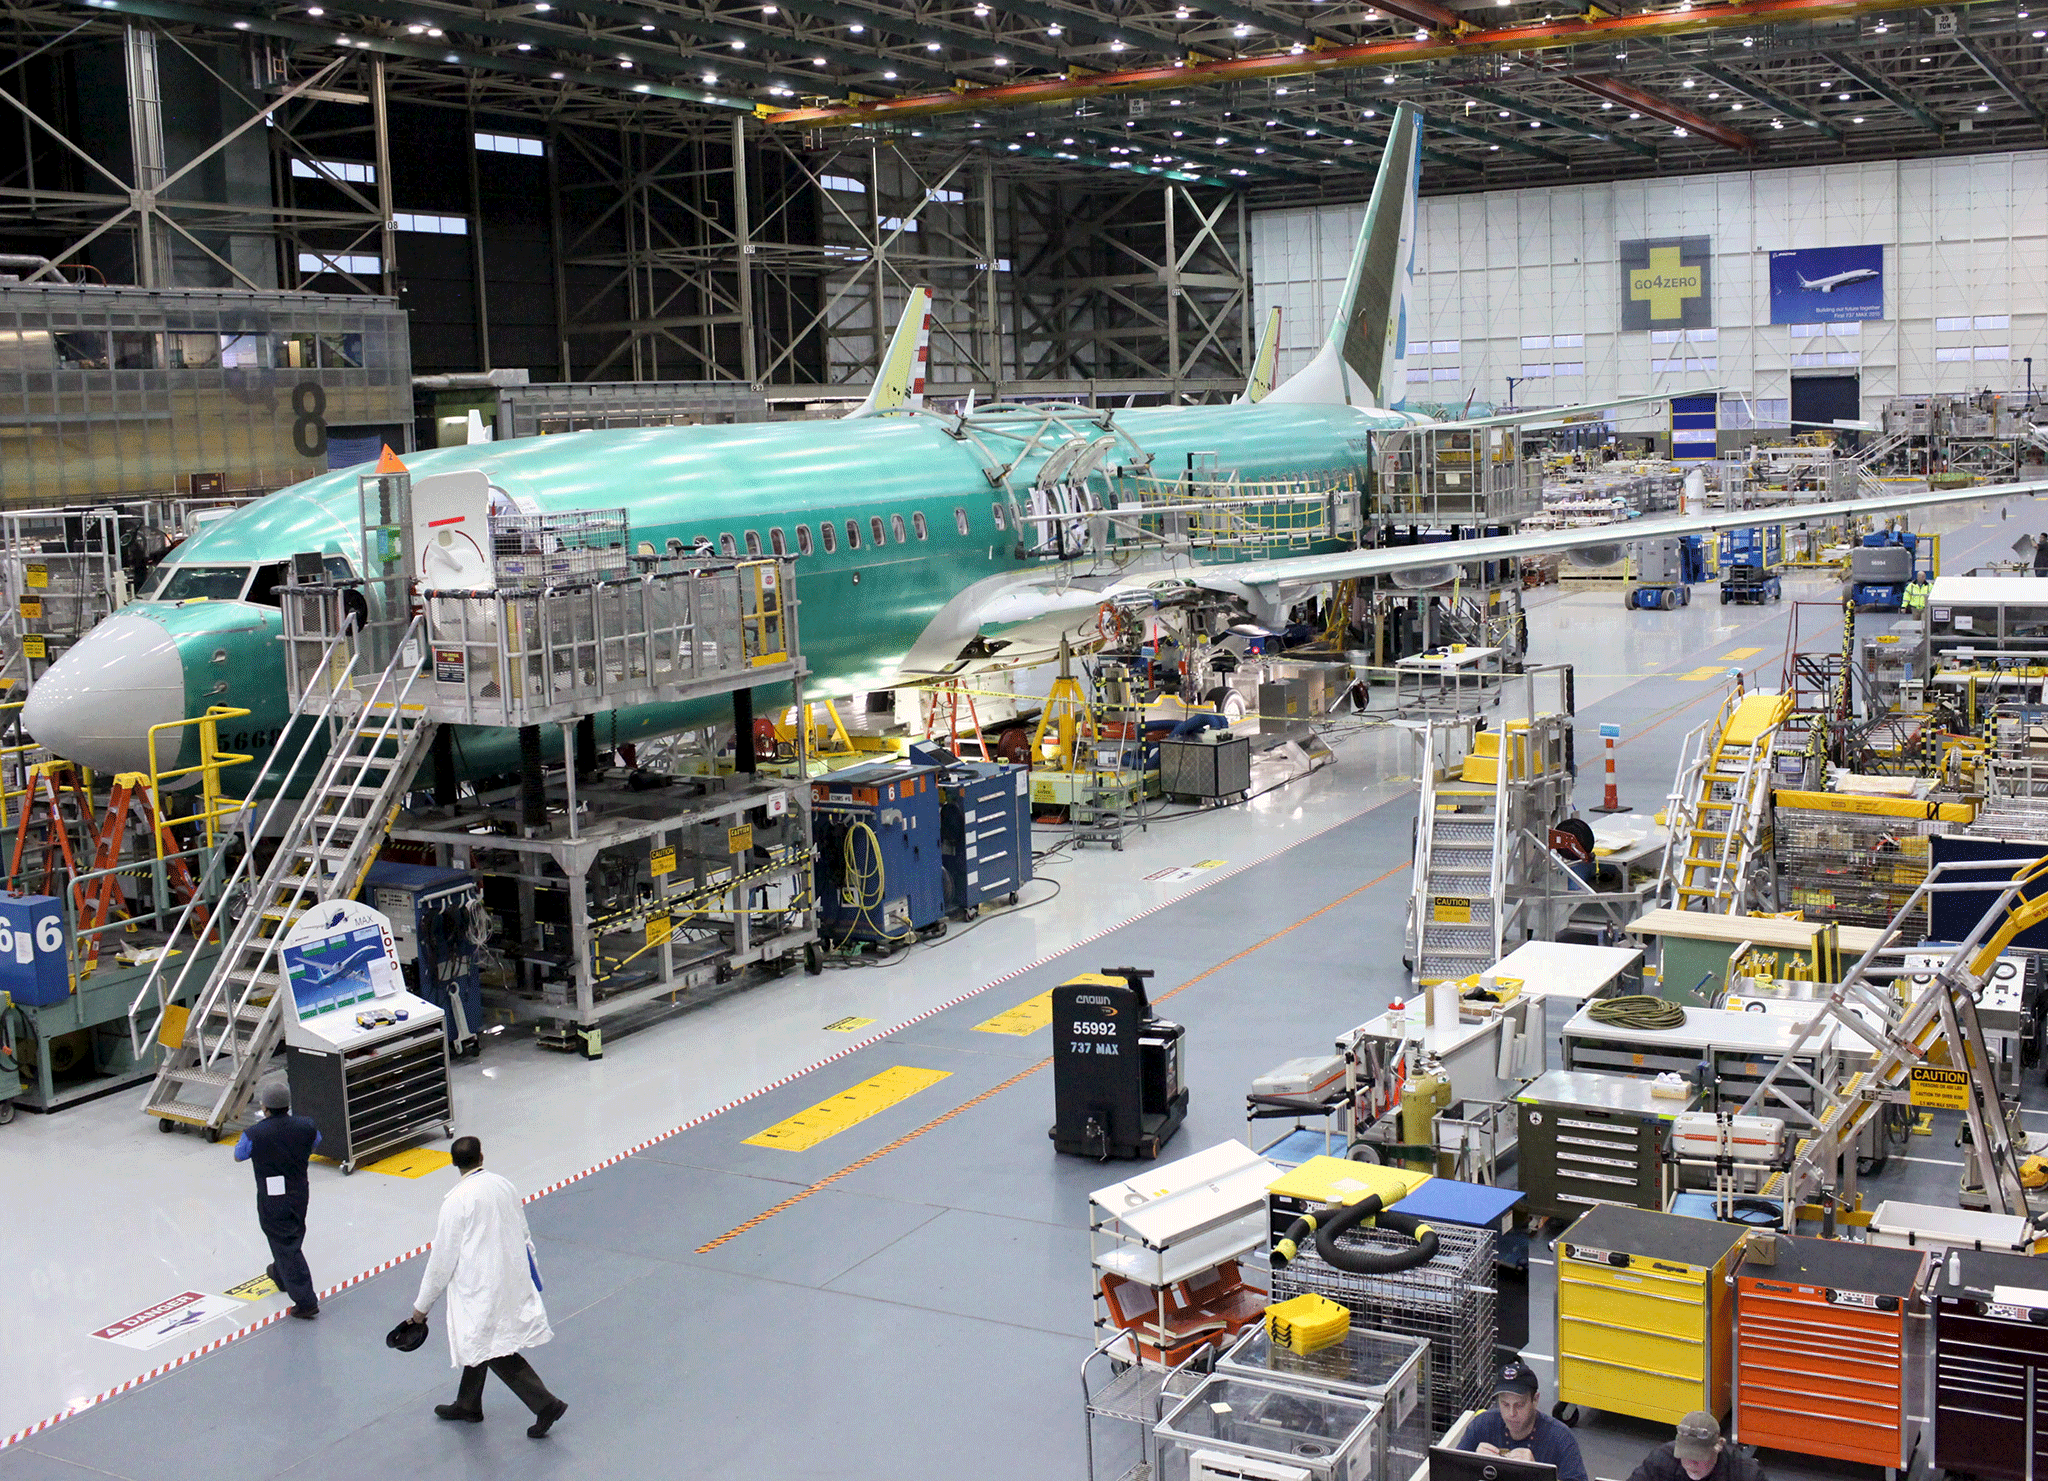 A Boeing 737 MAX plane is seen during a media tour of the Boeing plant in Renton, Washington